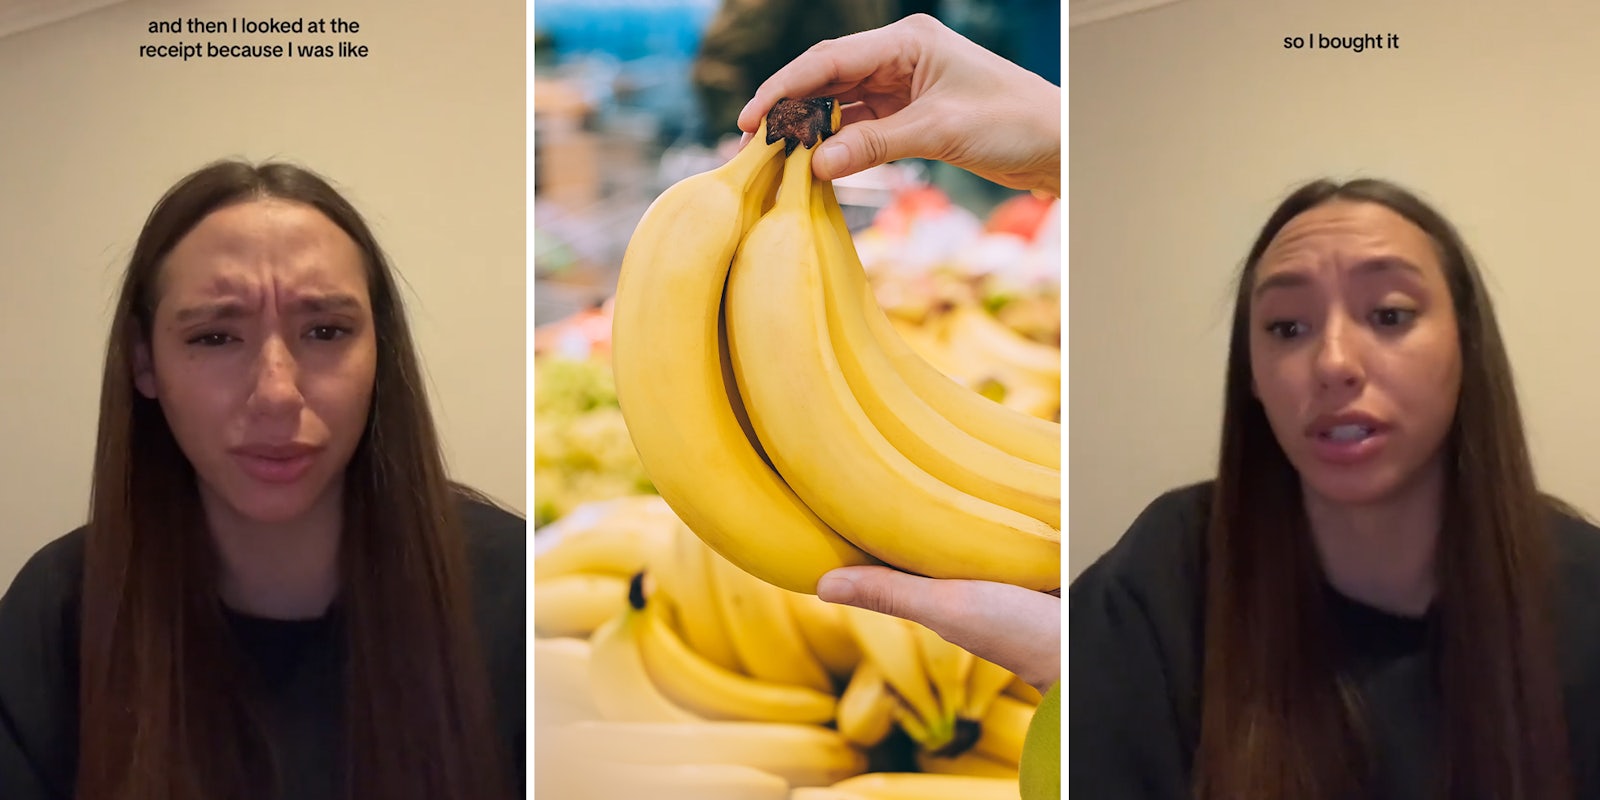 Woman tries to buy 5 bananas, gets charged for 50 bananas instead